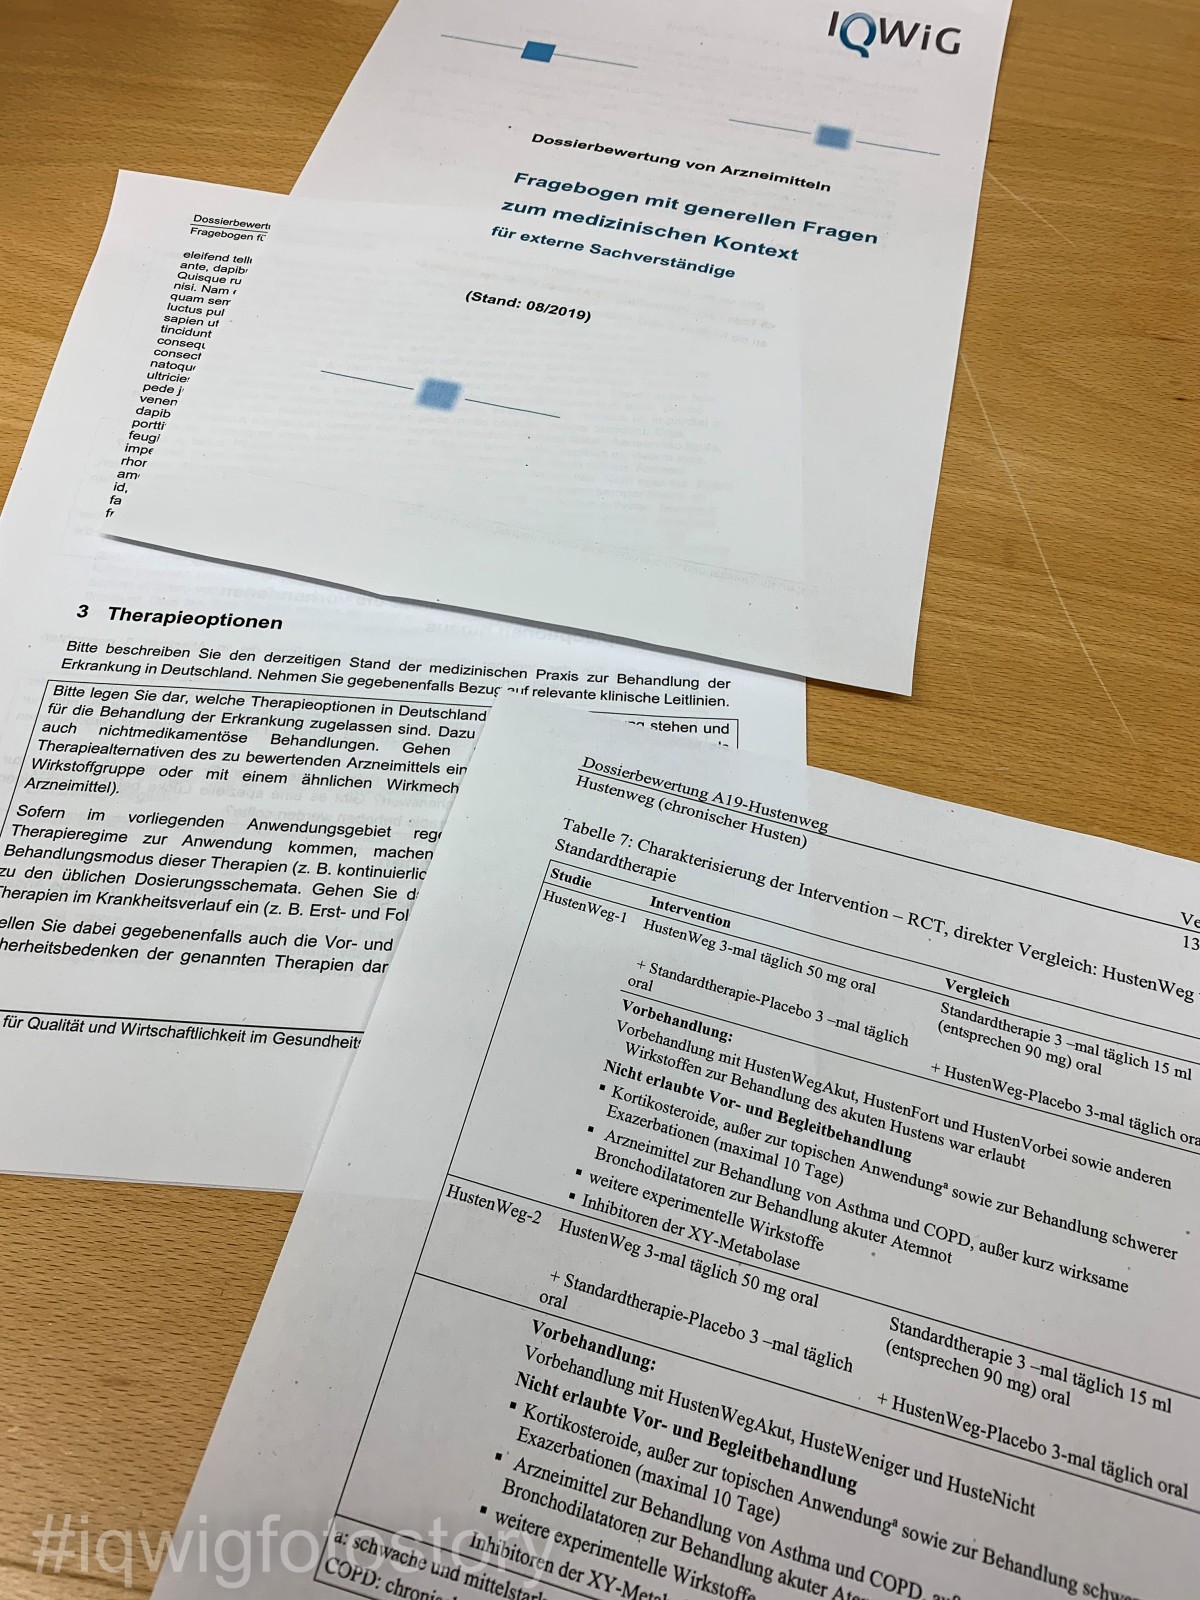 Desk with three sheets of paper: two from the questionnaire completed by the external experts and one from the draft of the dossier assessment describing the treatment in the two clinical studies.